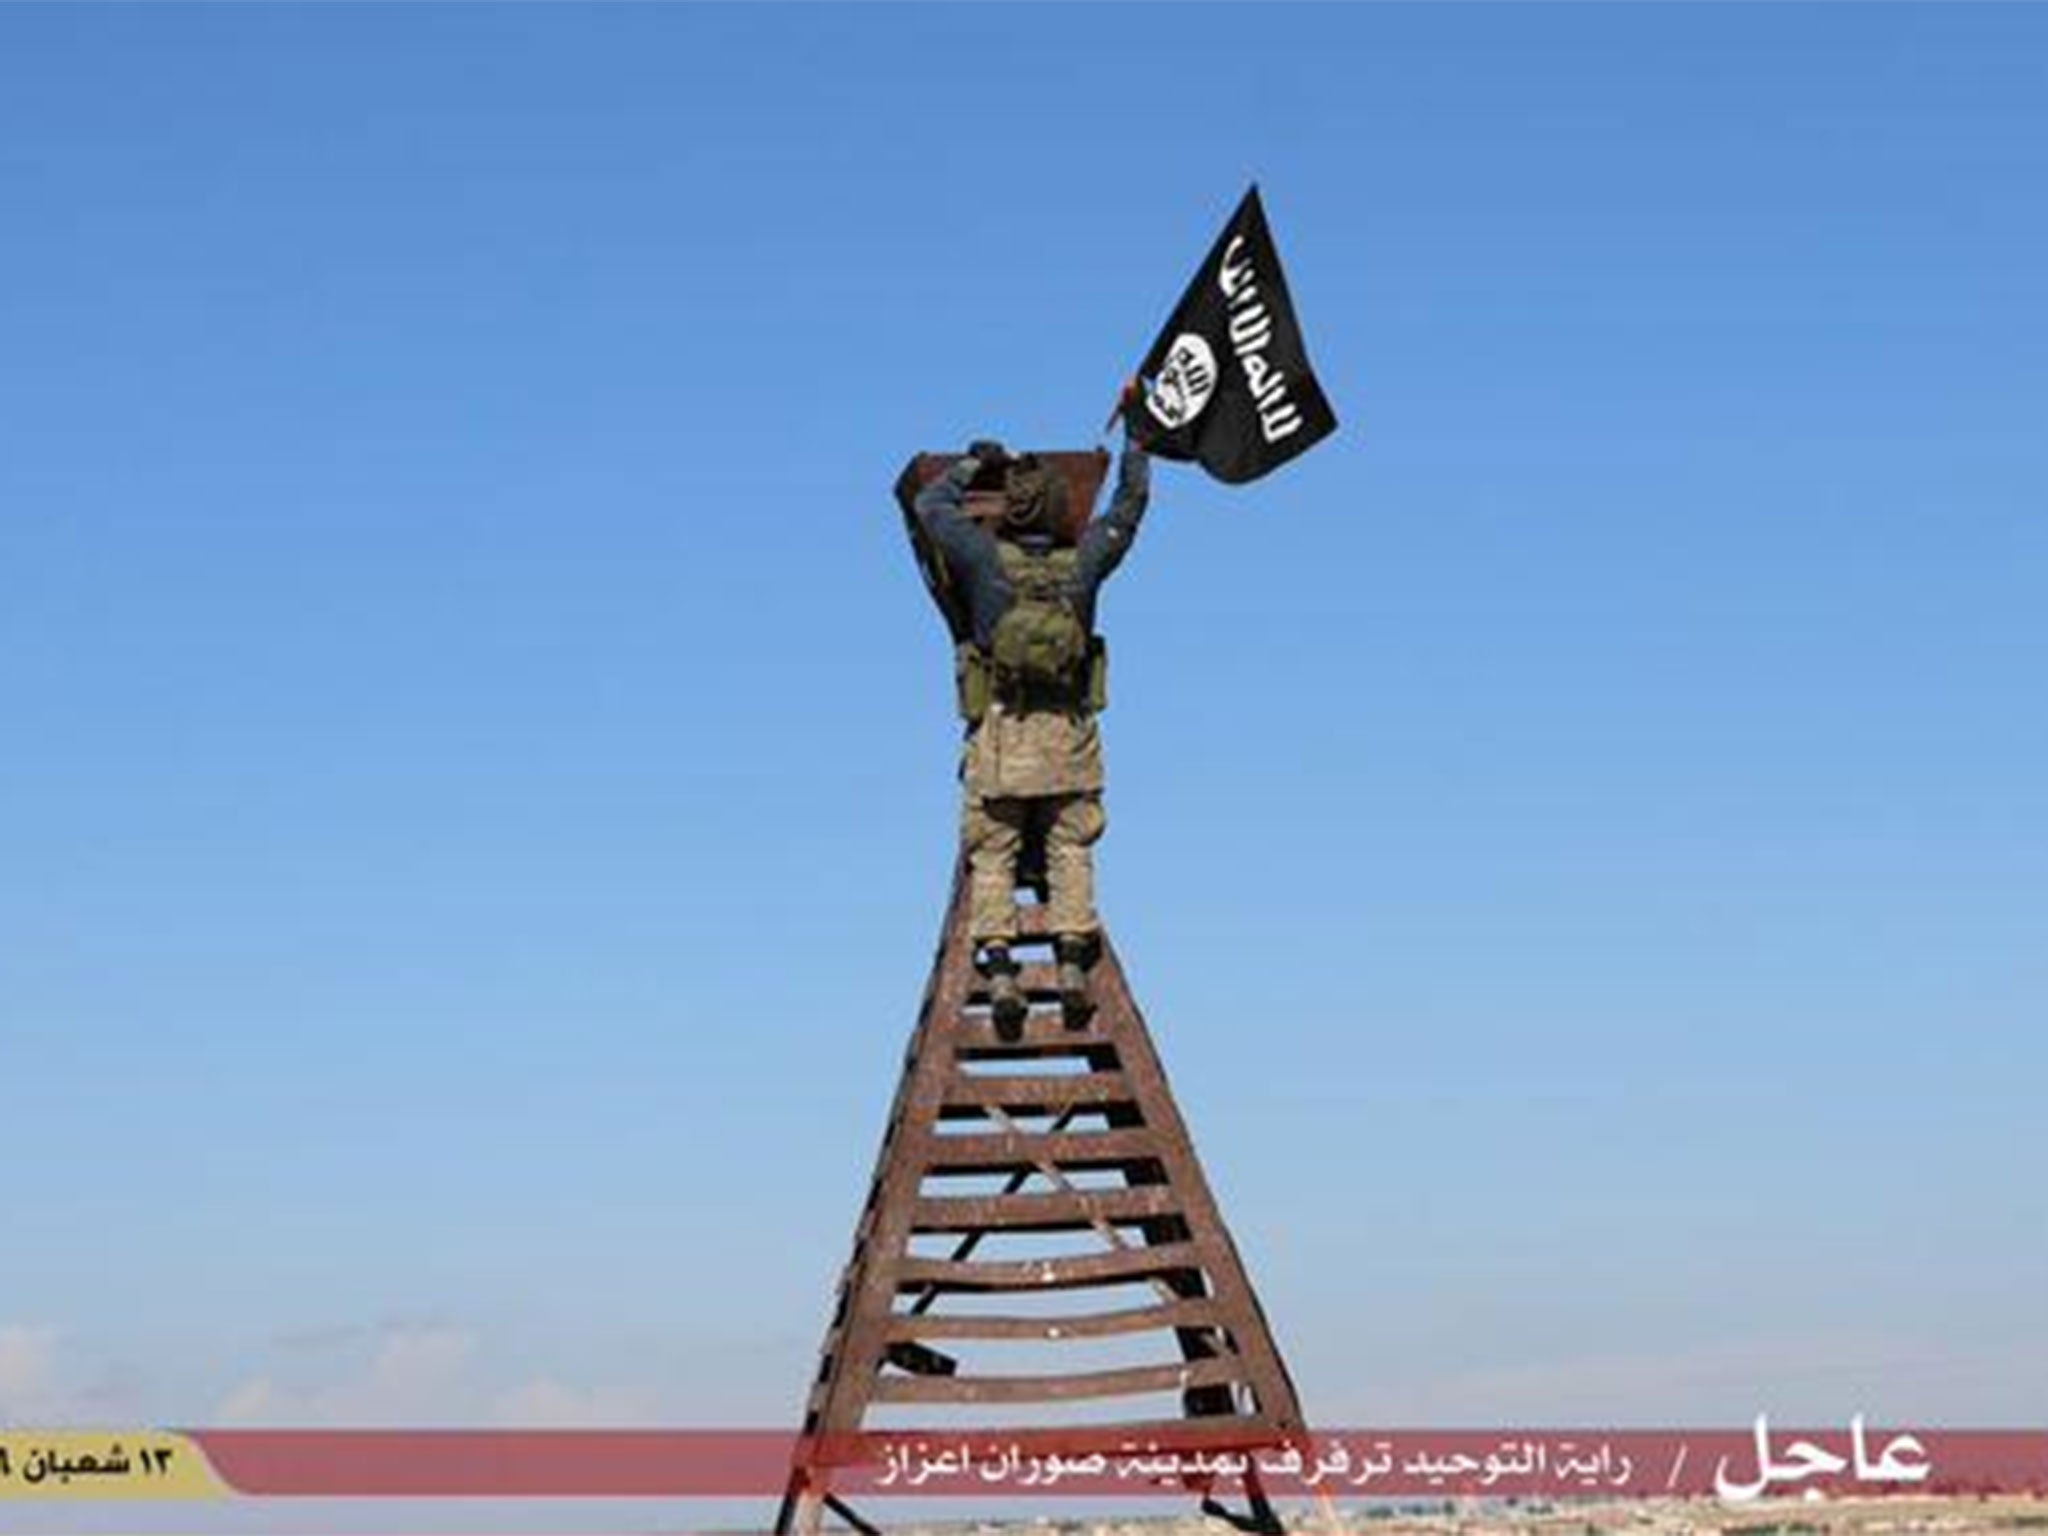 An image shared by Isis-supporting social media accounts claimed to show the raising of the Isis flag in the town of Soran Azaz